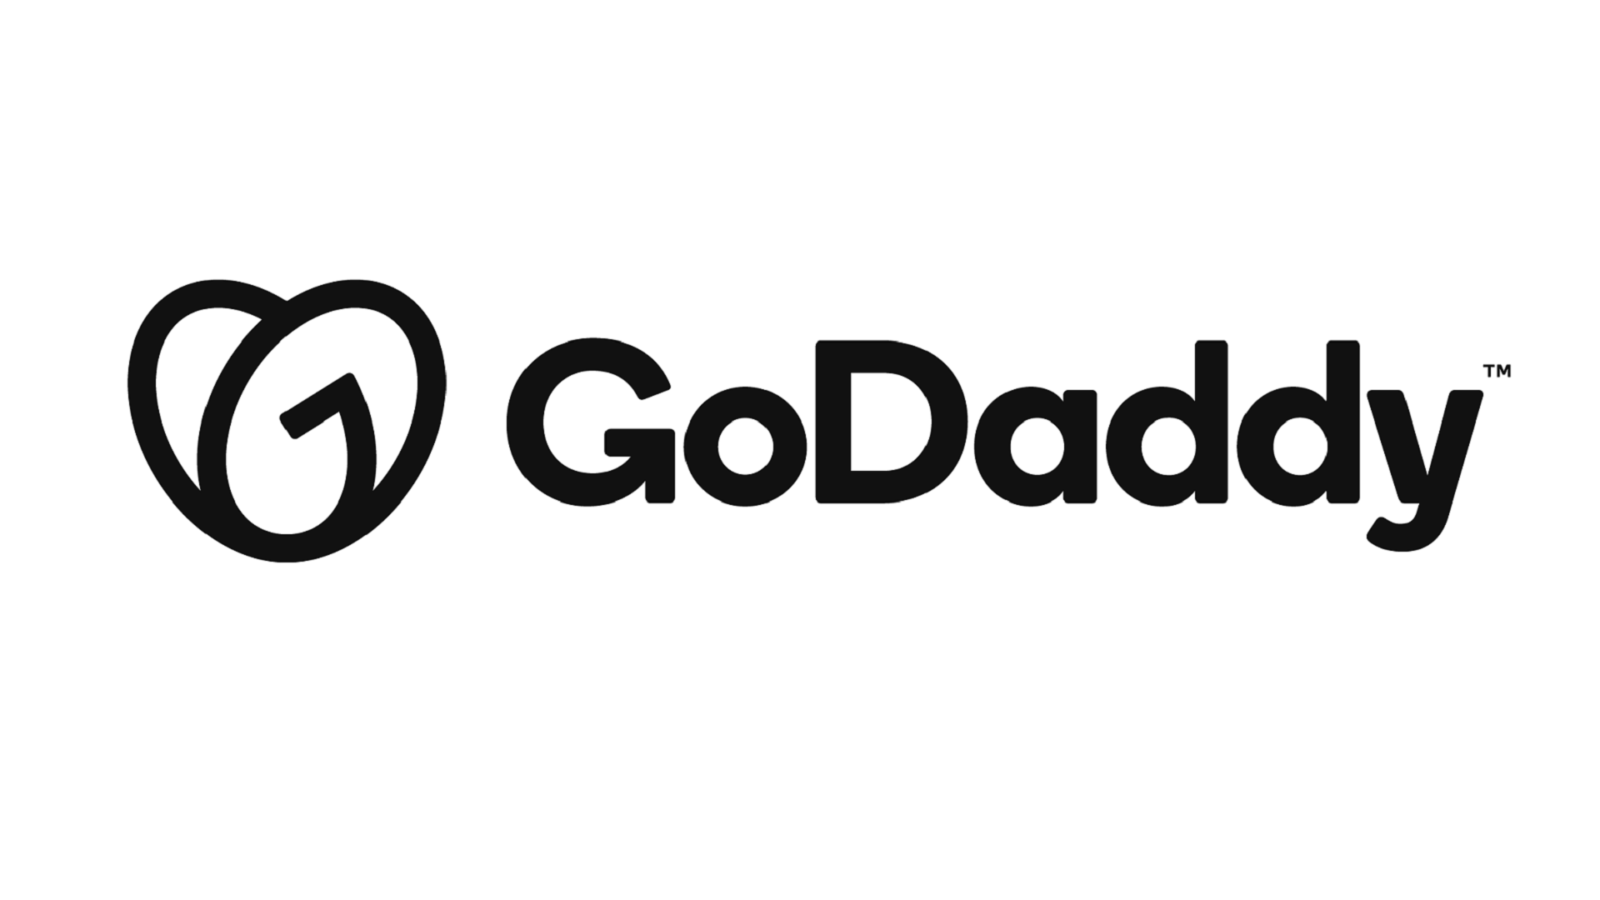 Login Email with Godaddy Webmail